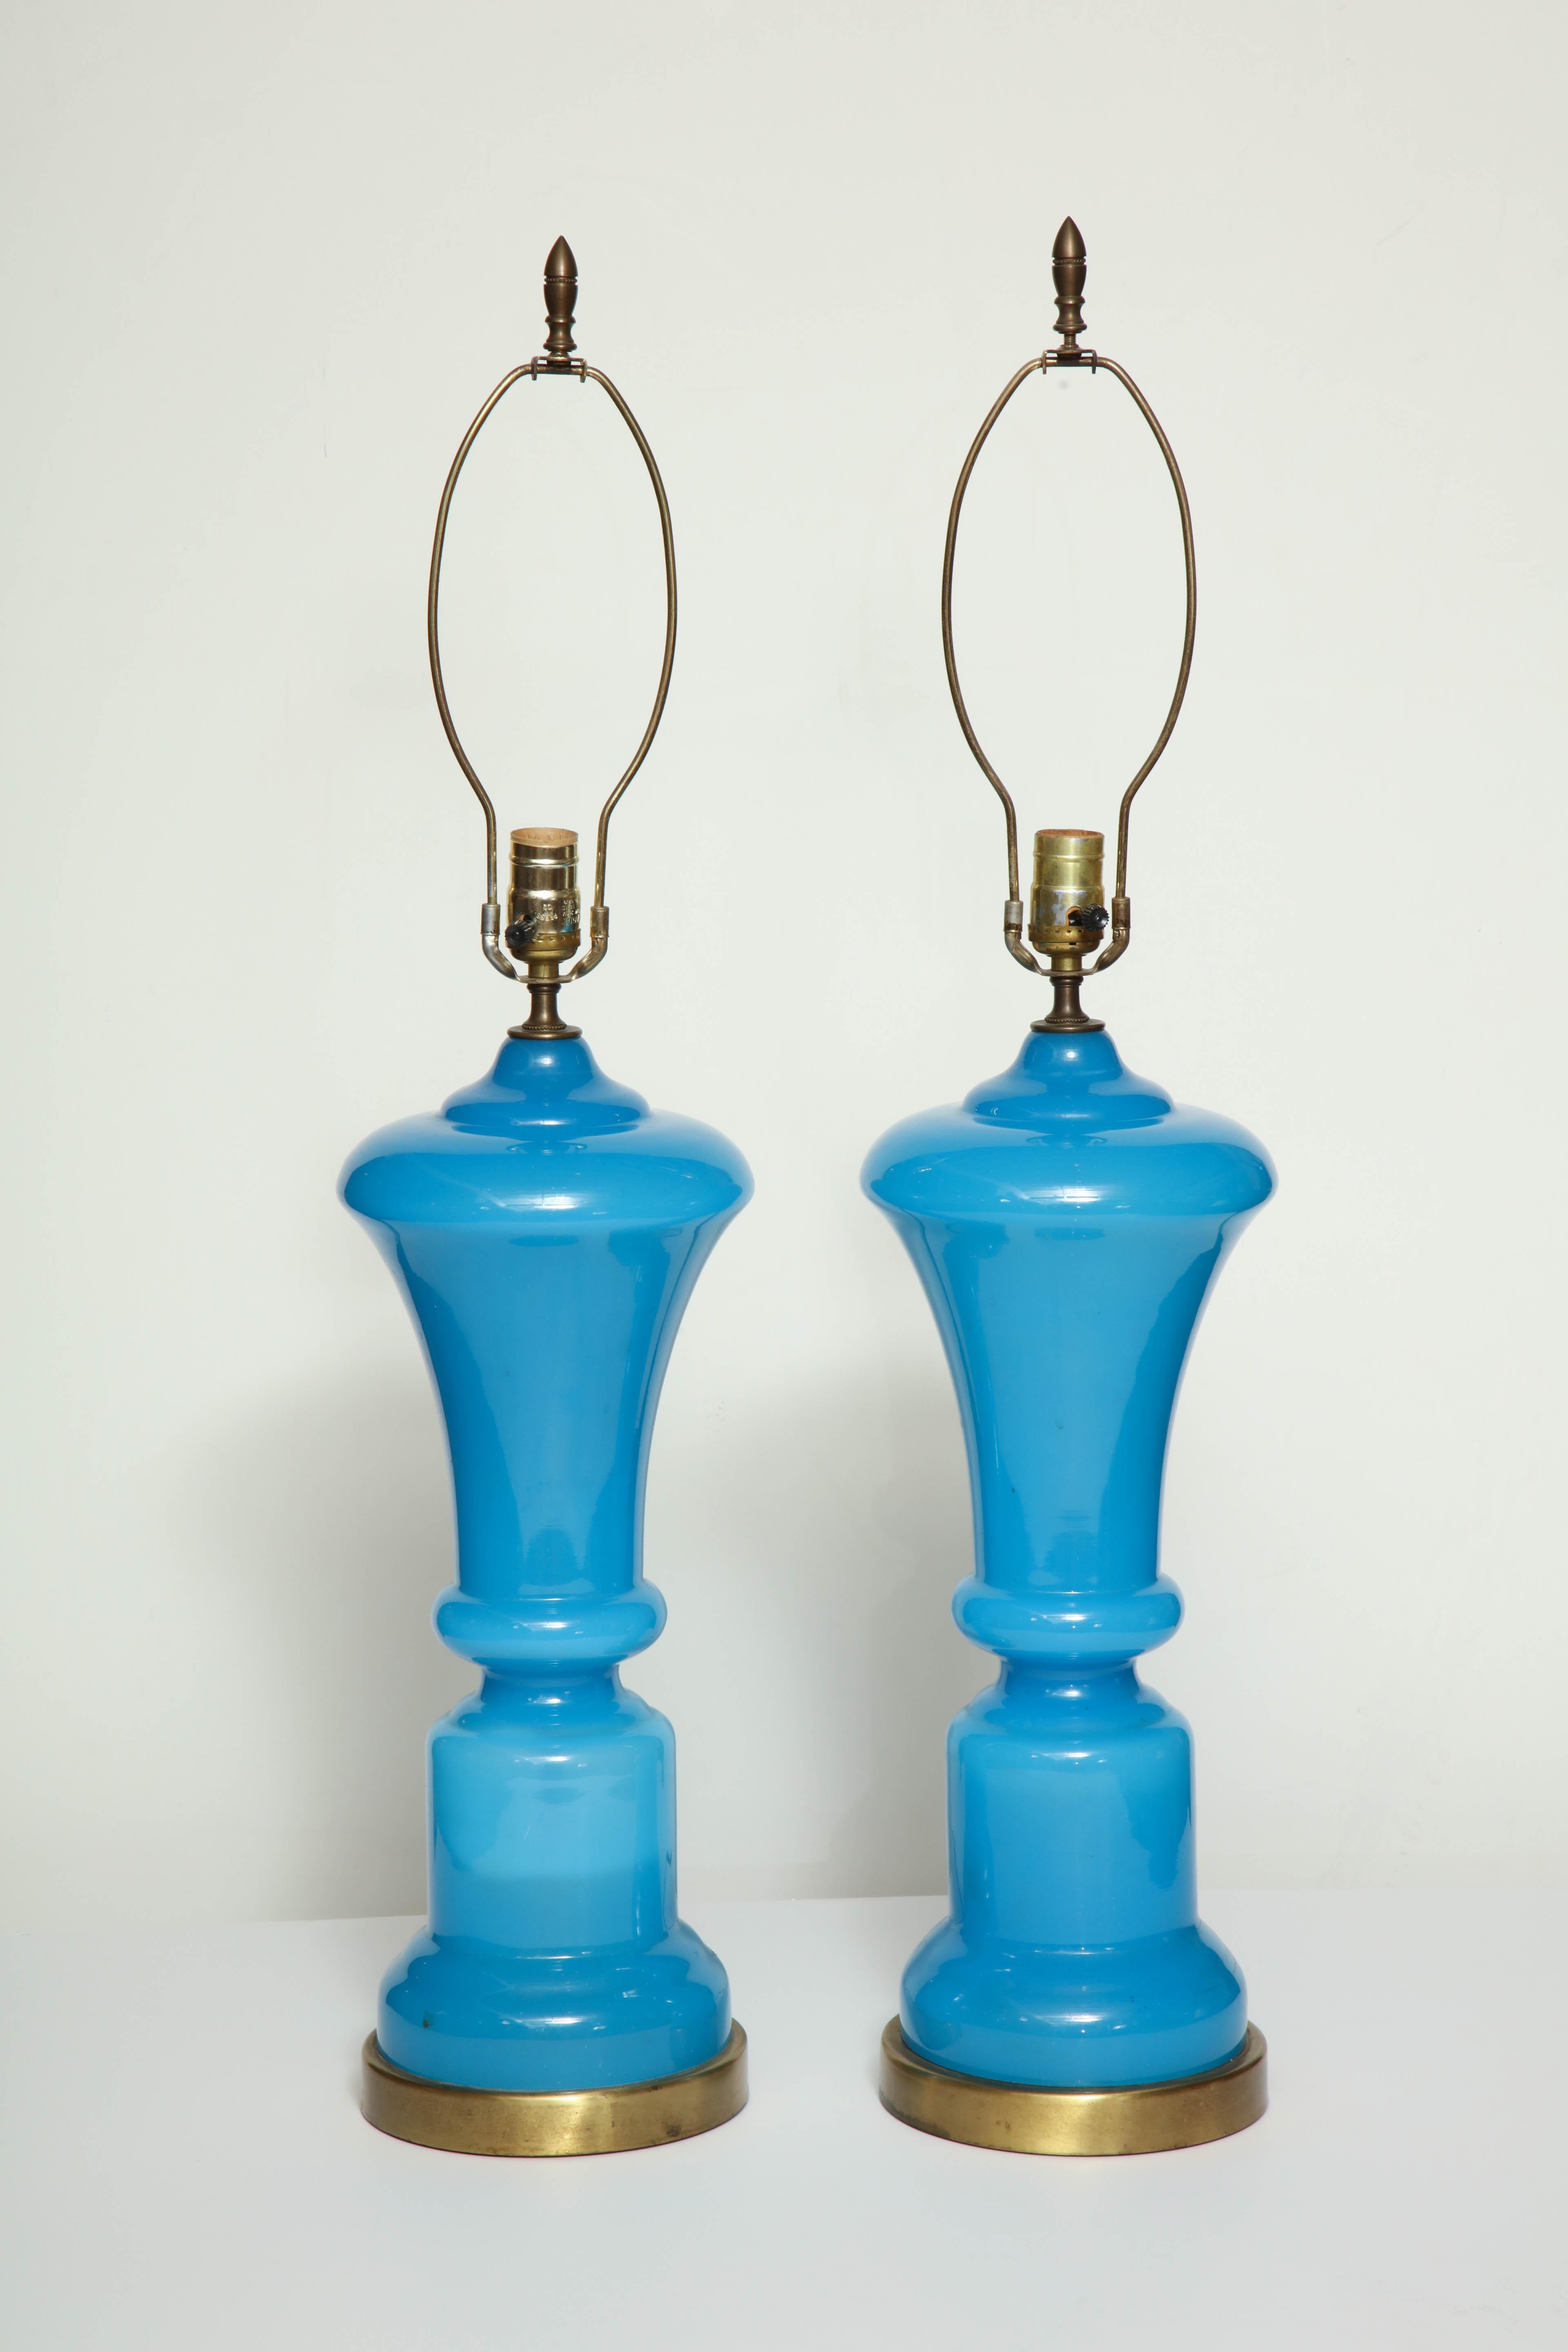 Pair of French opaline lamps, circa 1950.